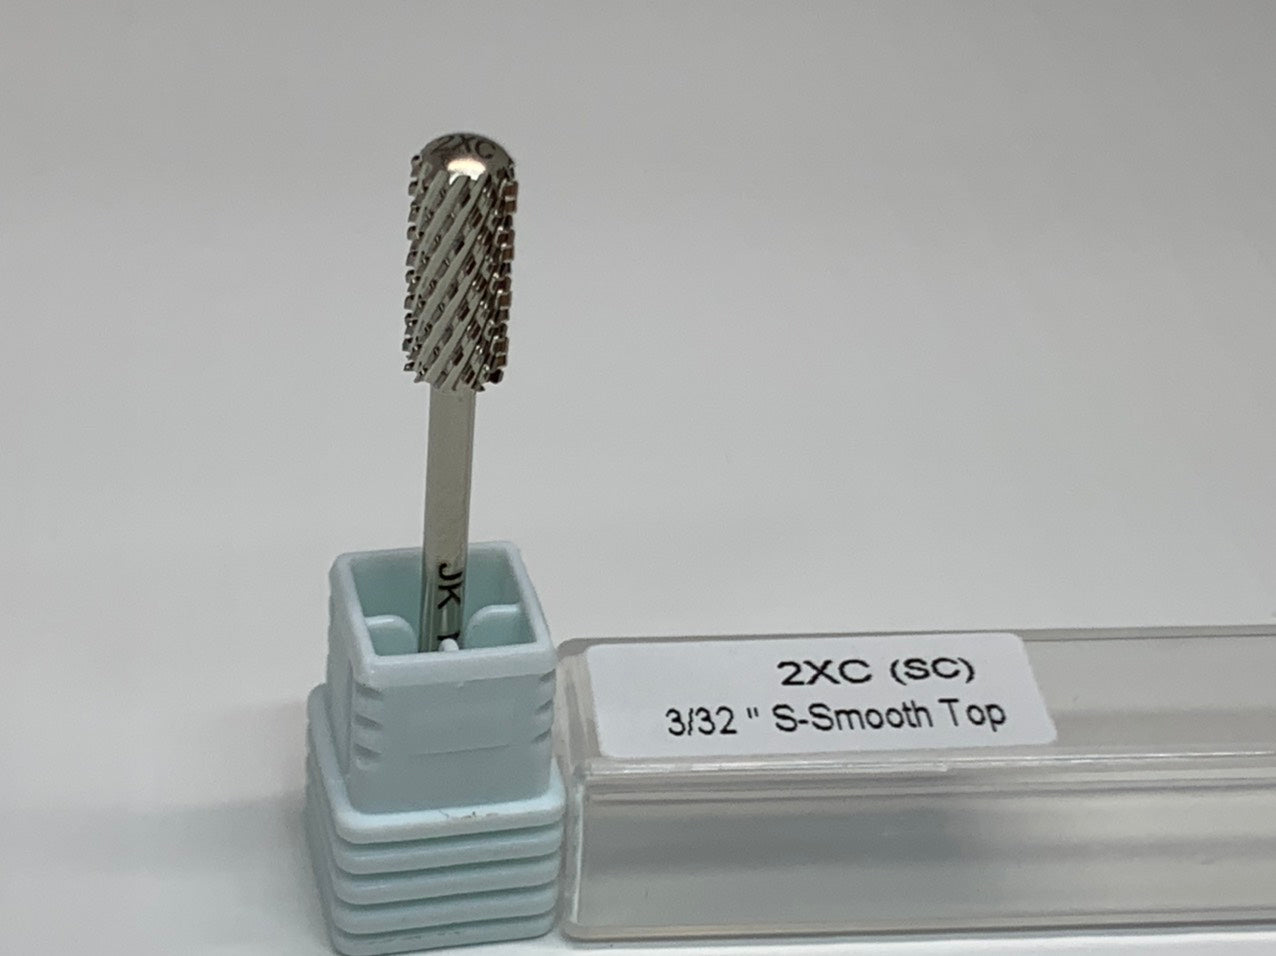 Drill bit 2XC (sc) 3/32’’S-Smooth Top | BUY 5 GET 1 FREE